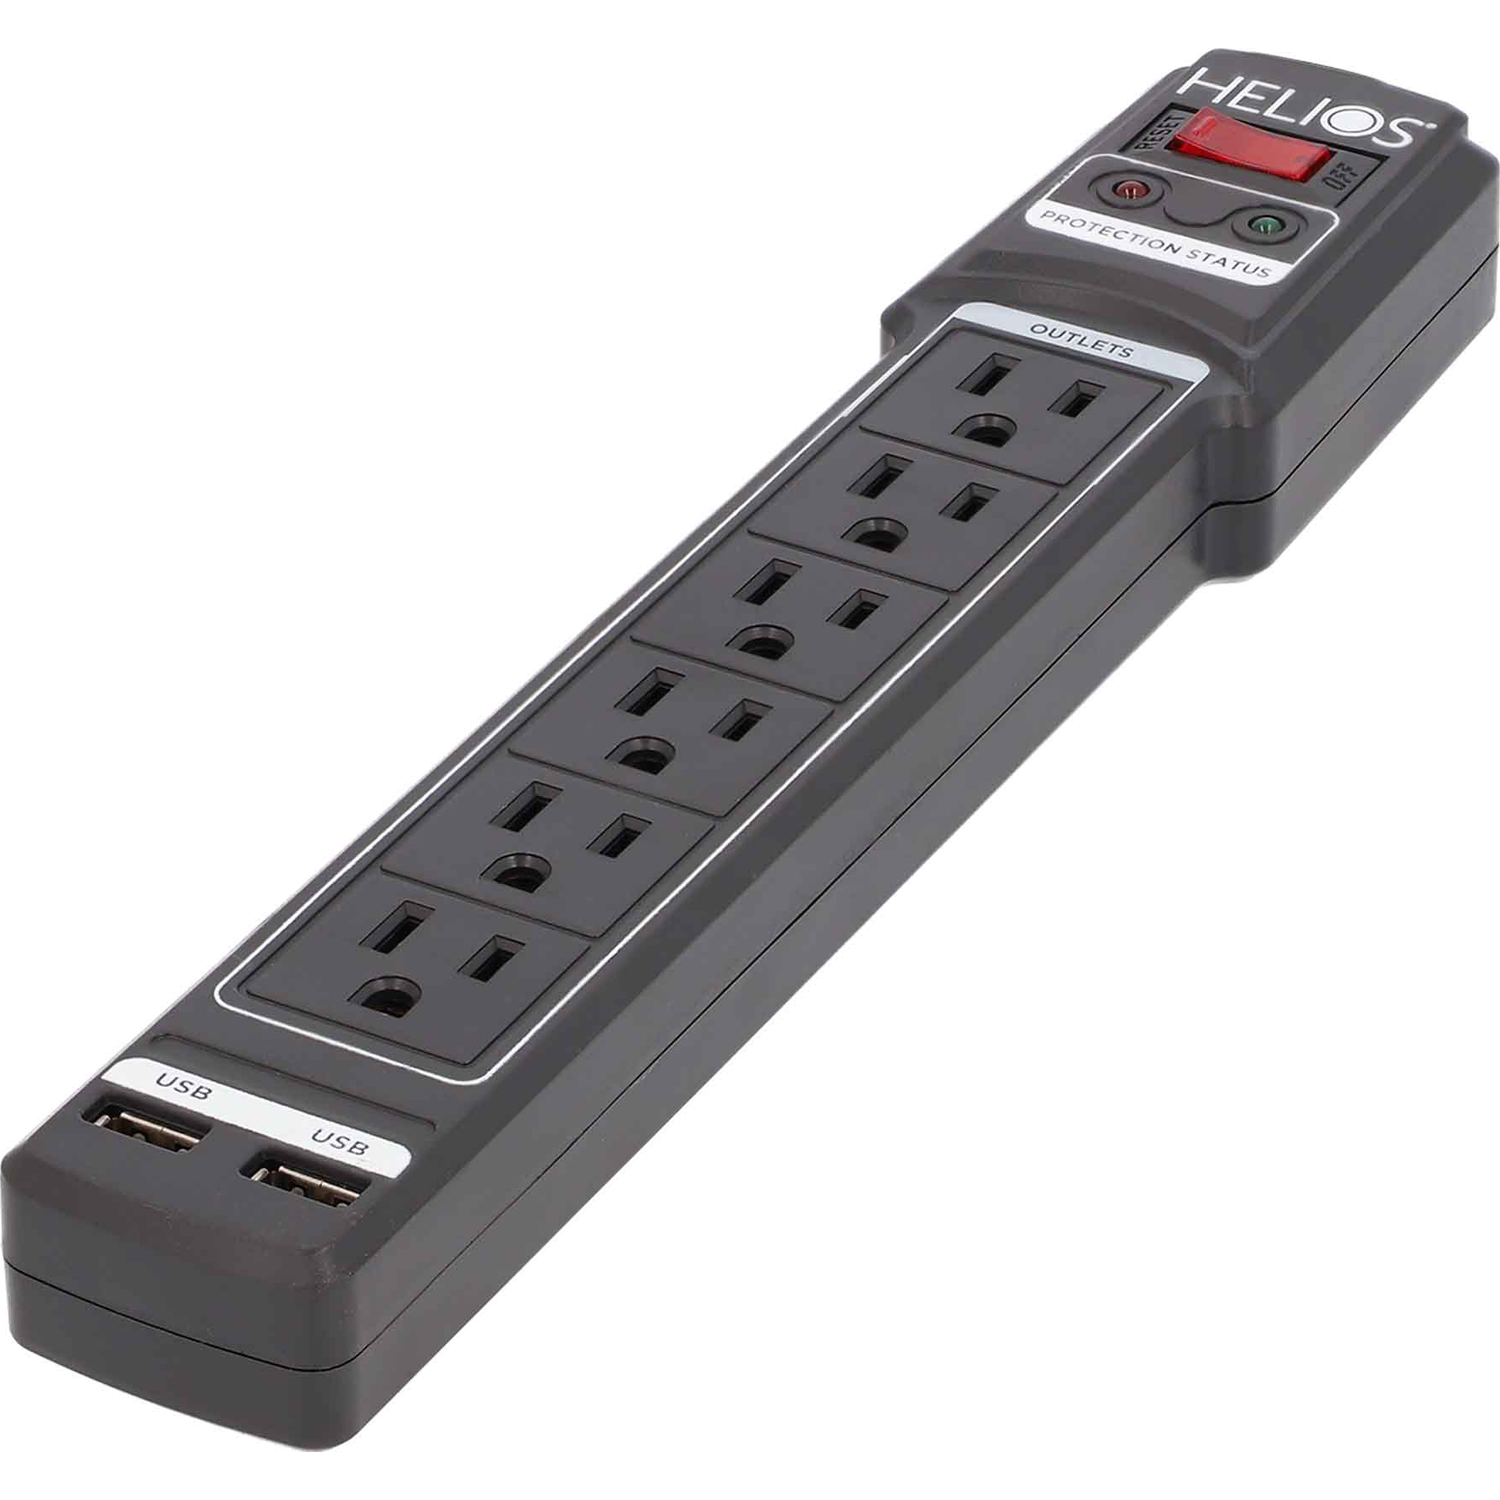 METRA AV AS-HP-206U 6 Outlet Surge Protector with 2 USB Charging Ports